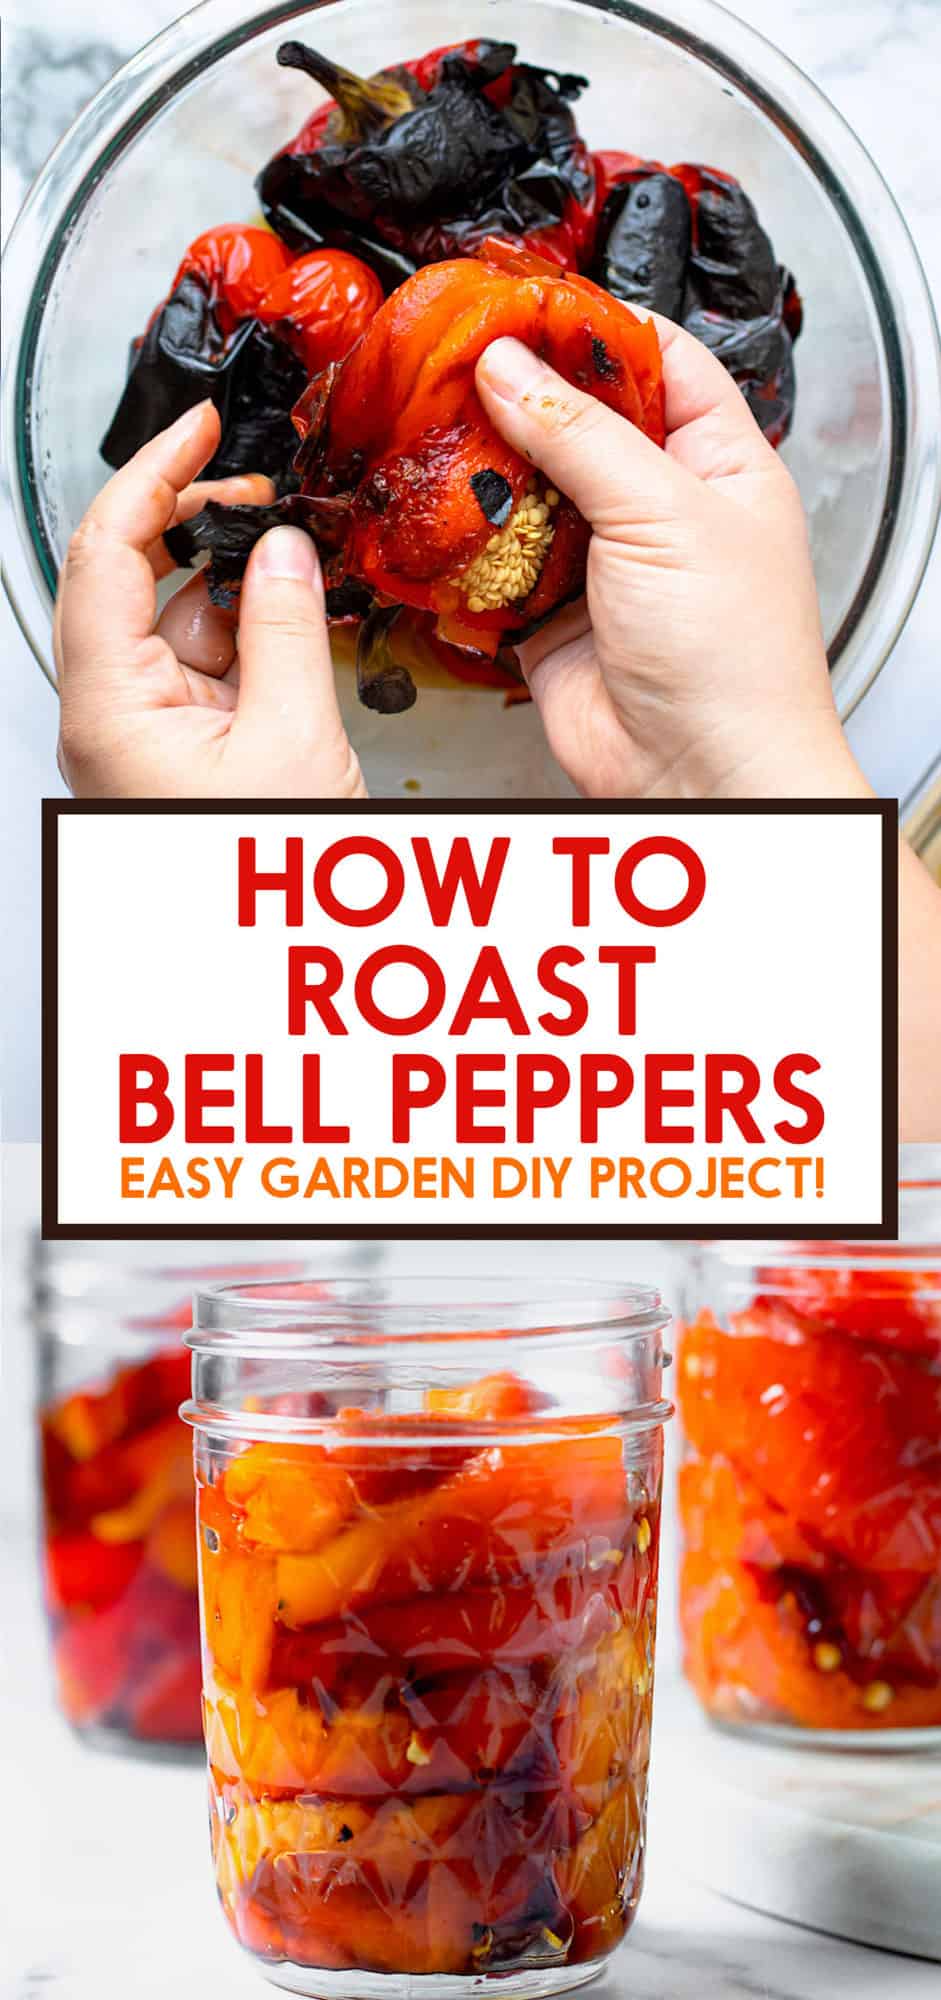 How to Roast Red Peppers Pinterest